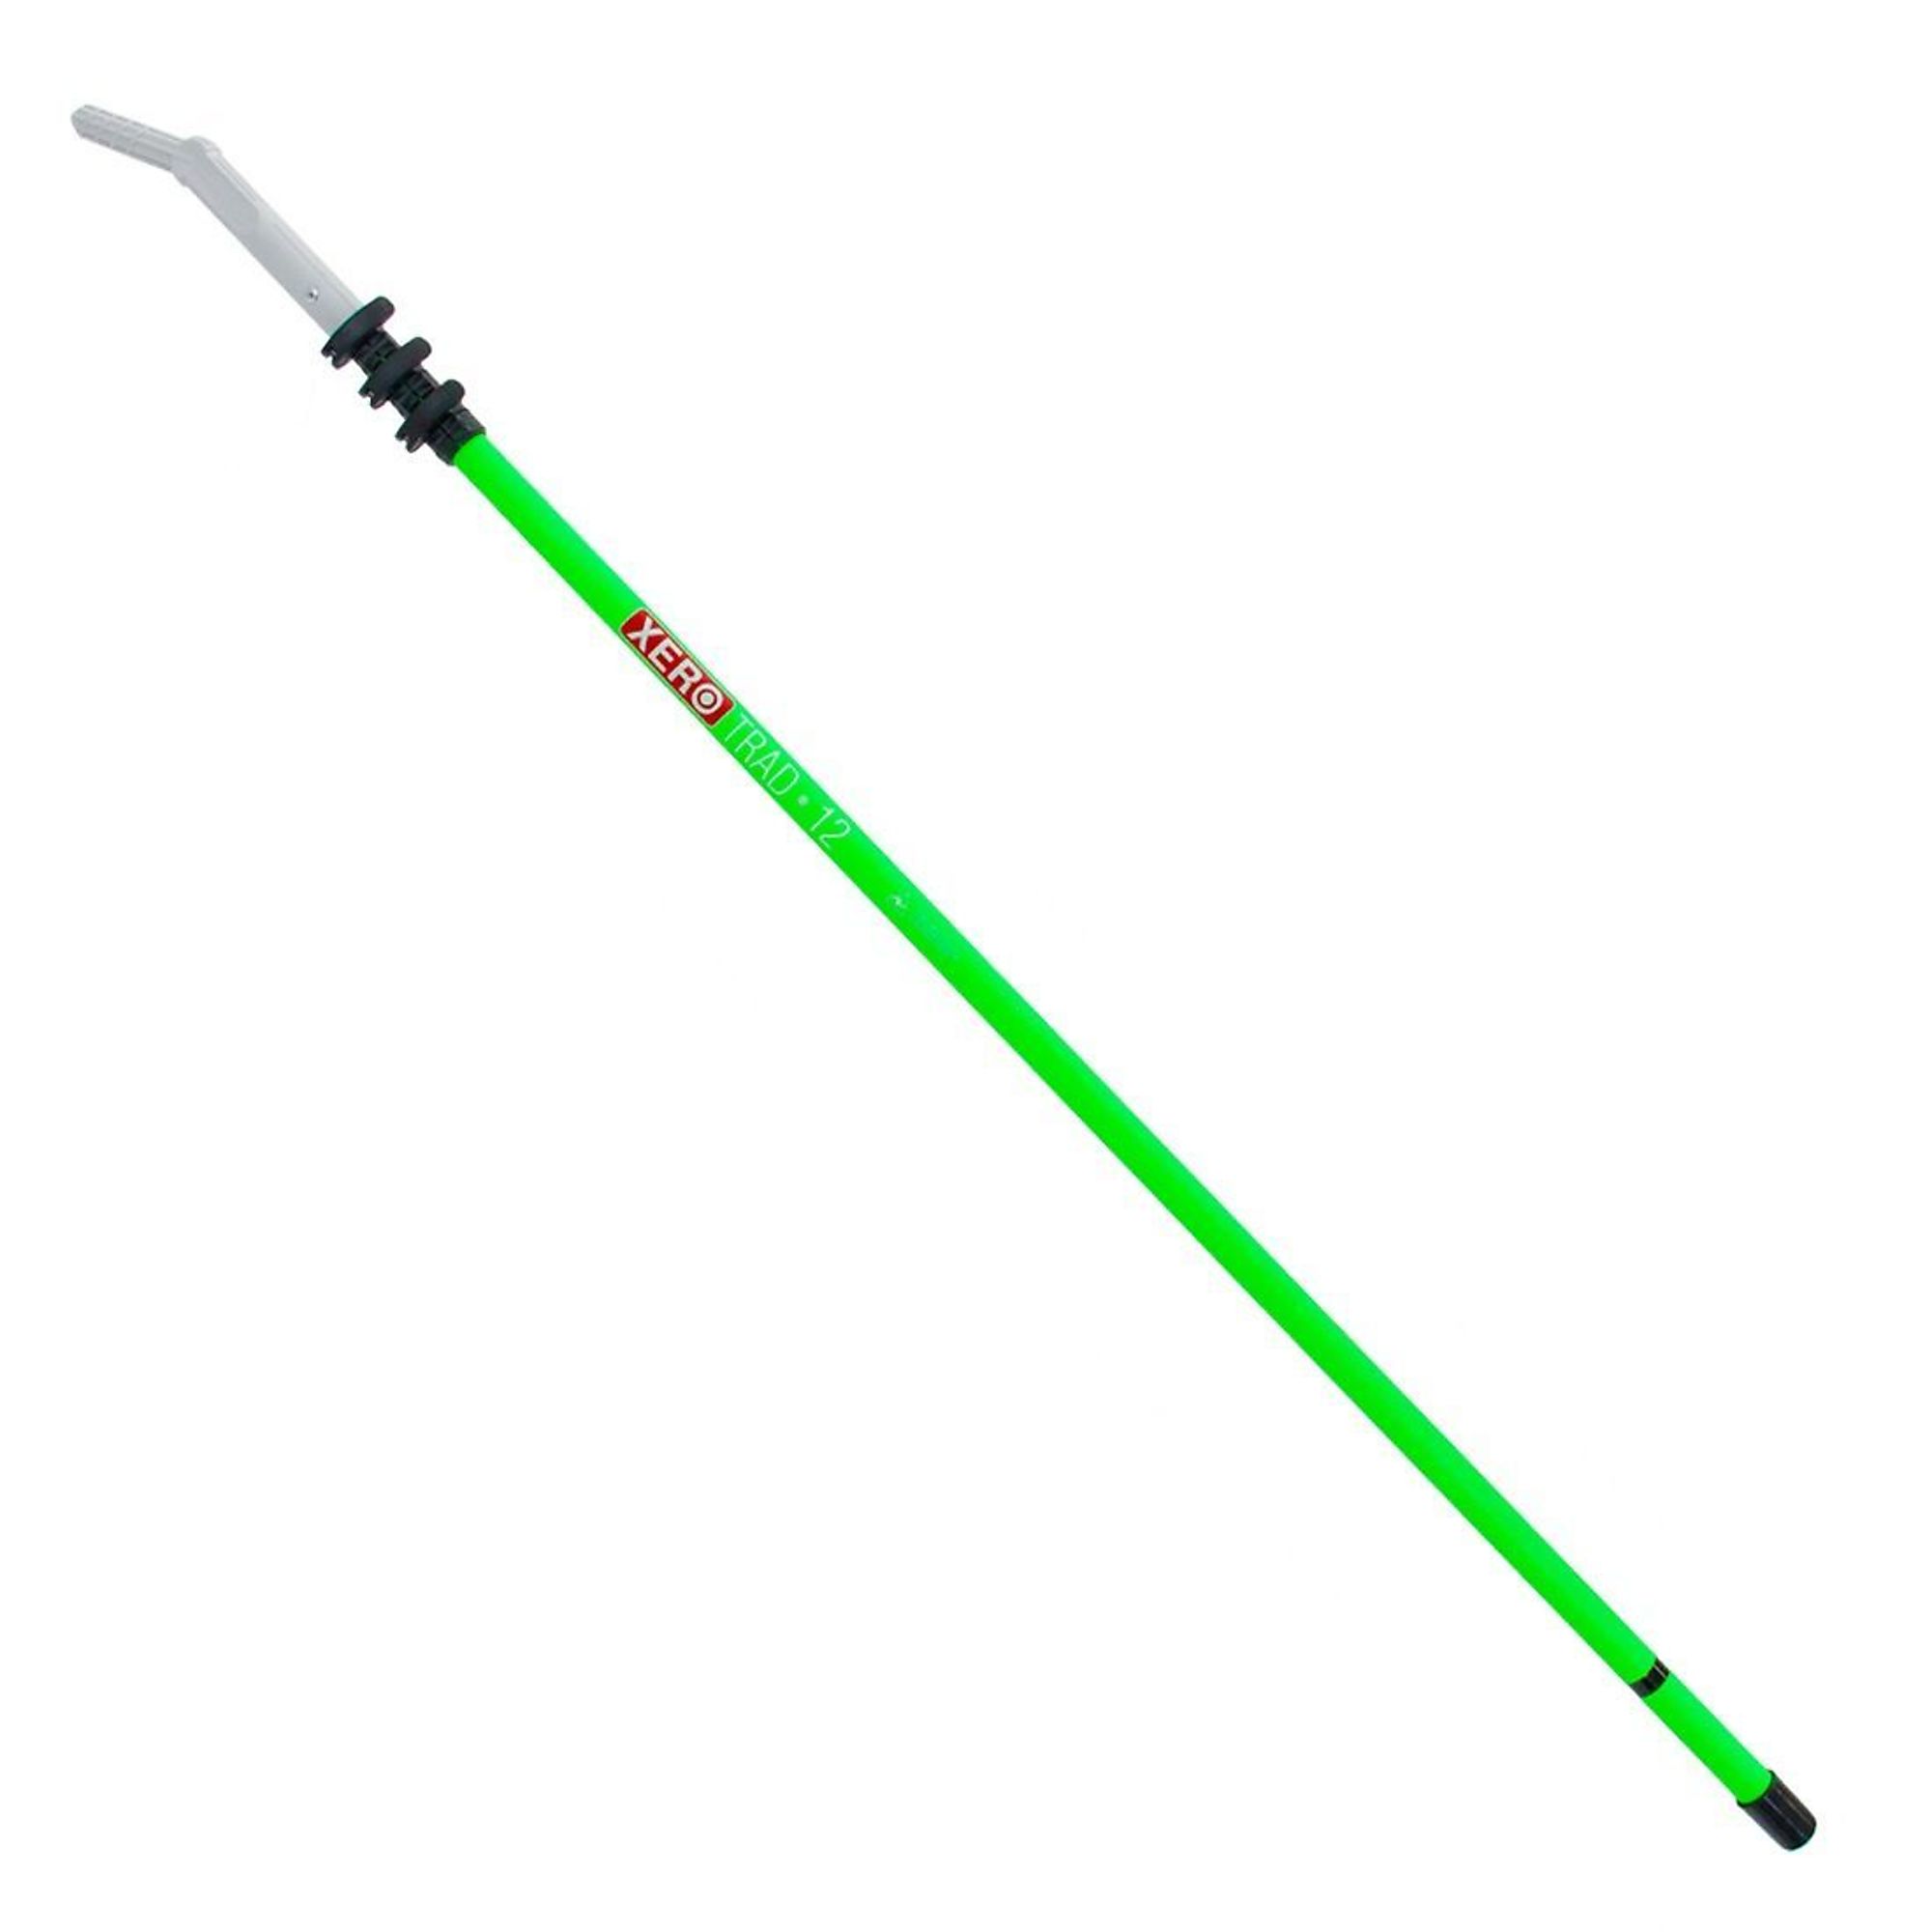 XERO, Trad Pole 2.0 Wagtail Tip - Green 12ft., Model 209-20-370